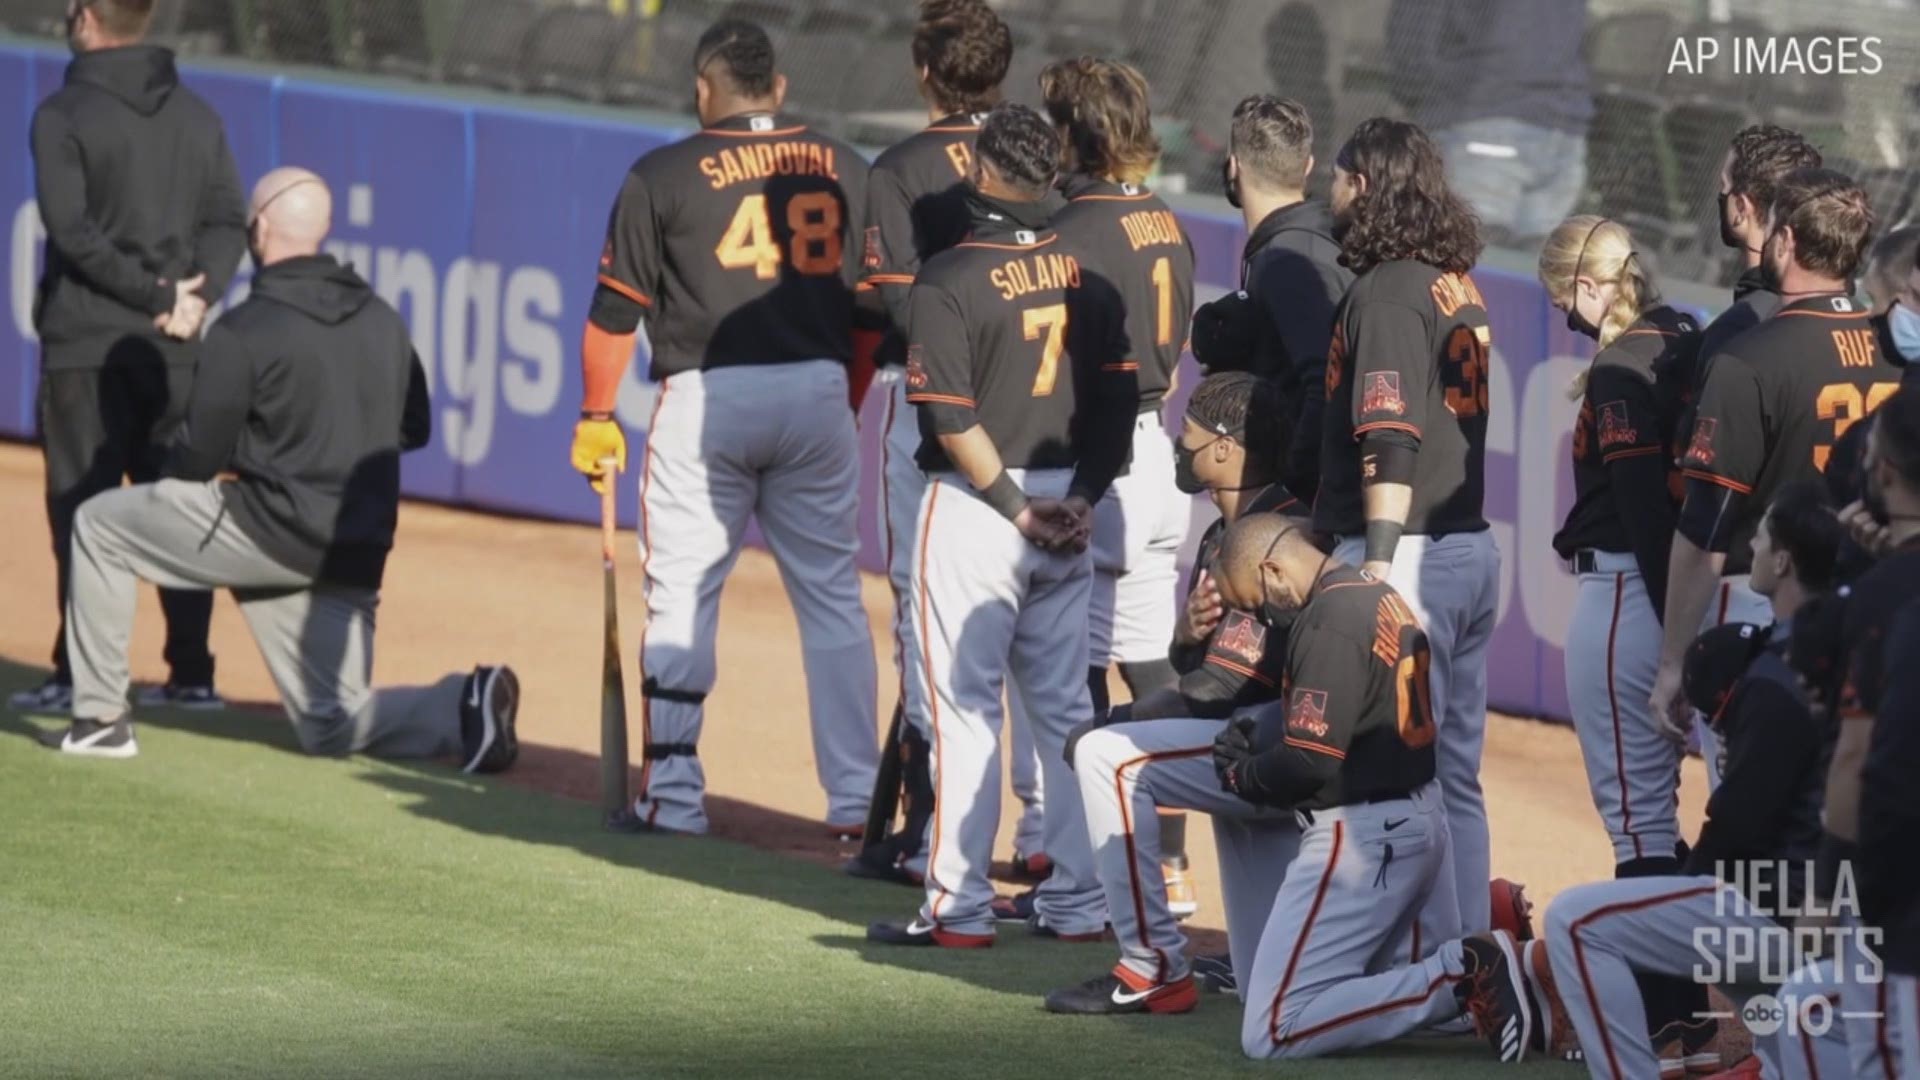 San Francisco Giants manager Gabe Kapler explained why he chose to kneel during the National Anthem before Monday's exhibition game in Oakland against the Athletics.